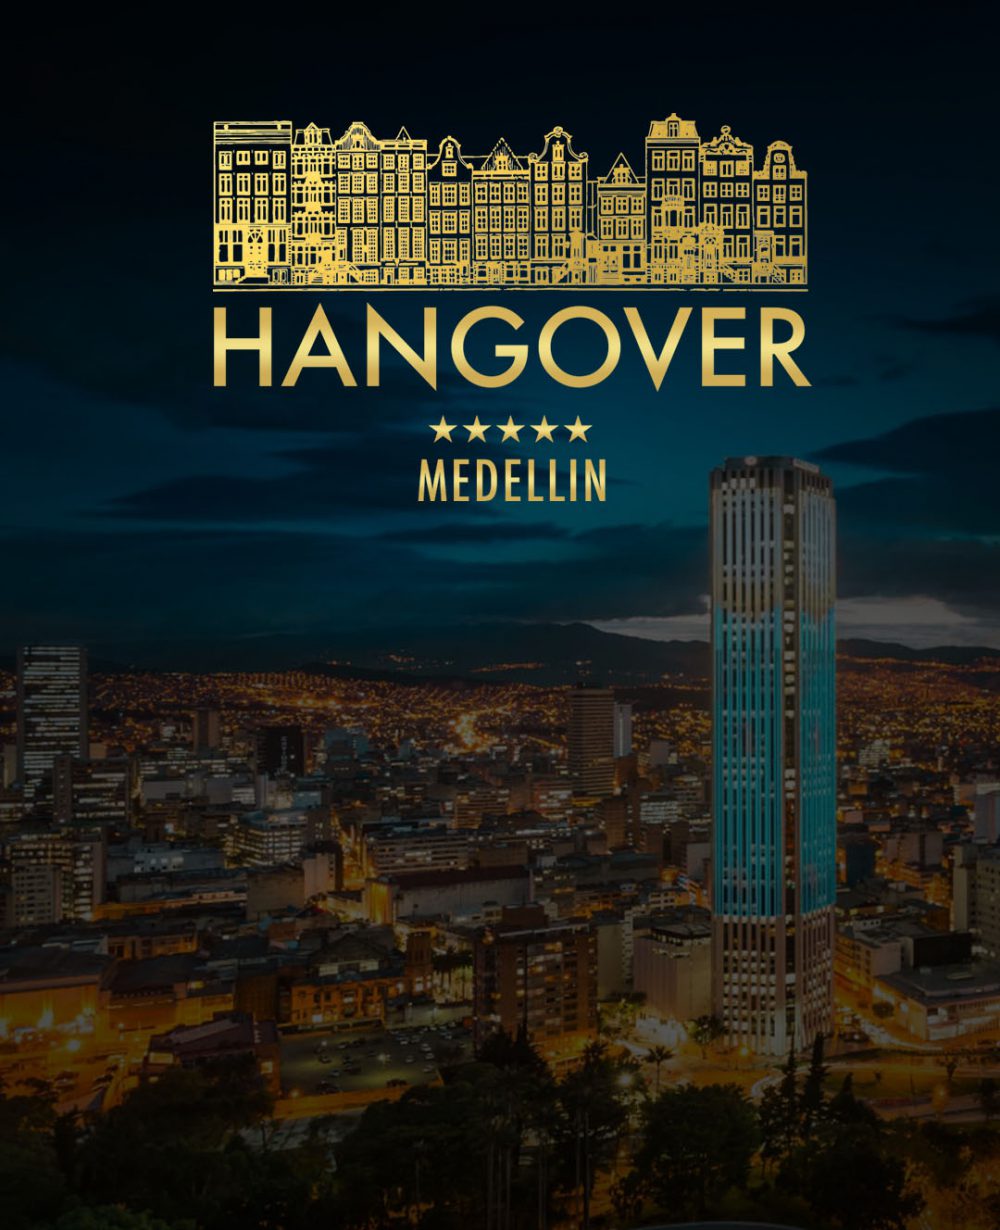 The Hangover - VIP Party Services